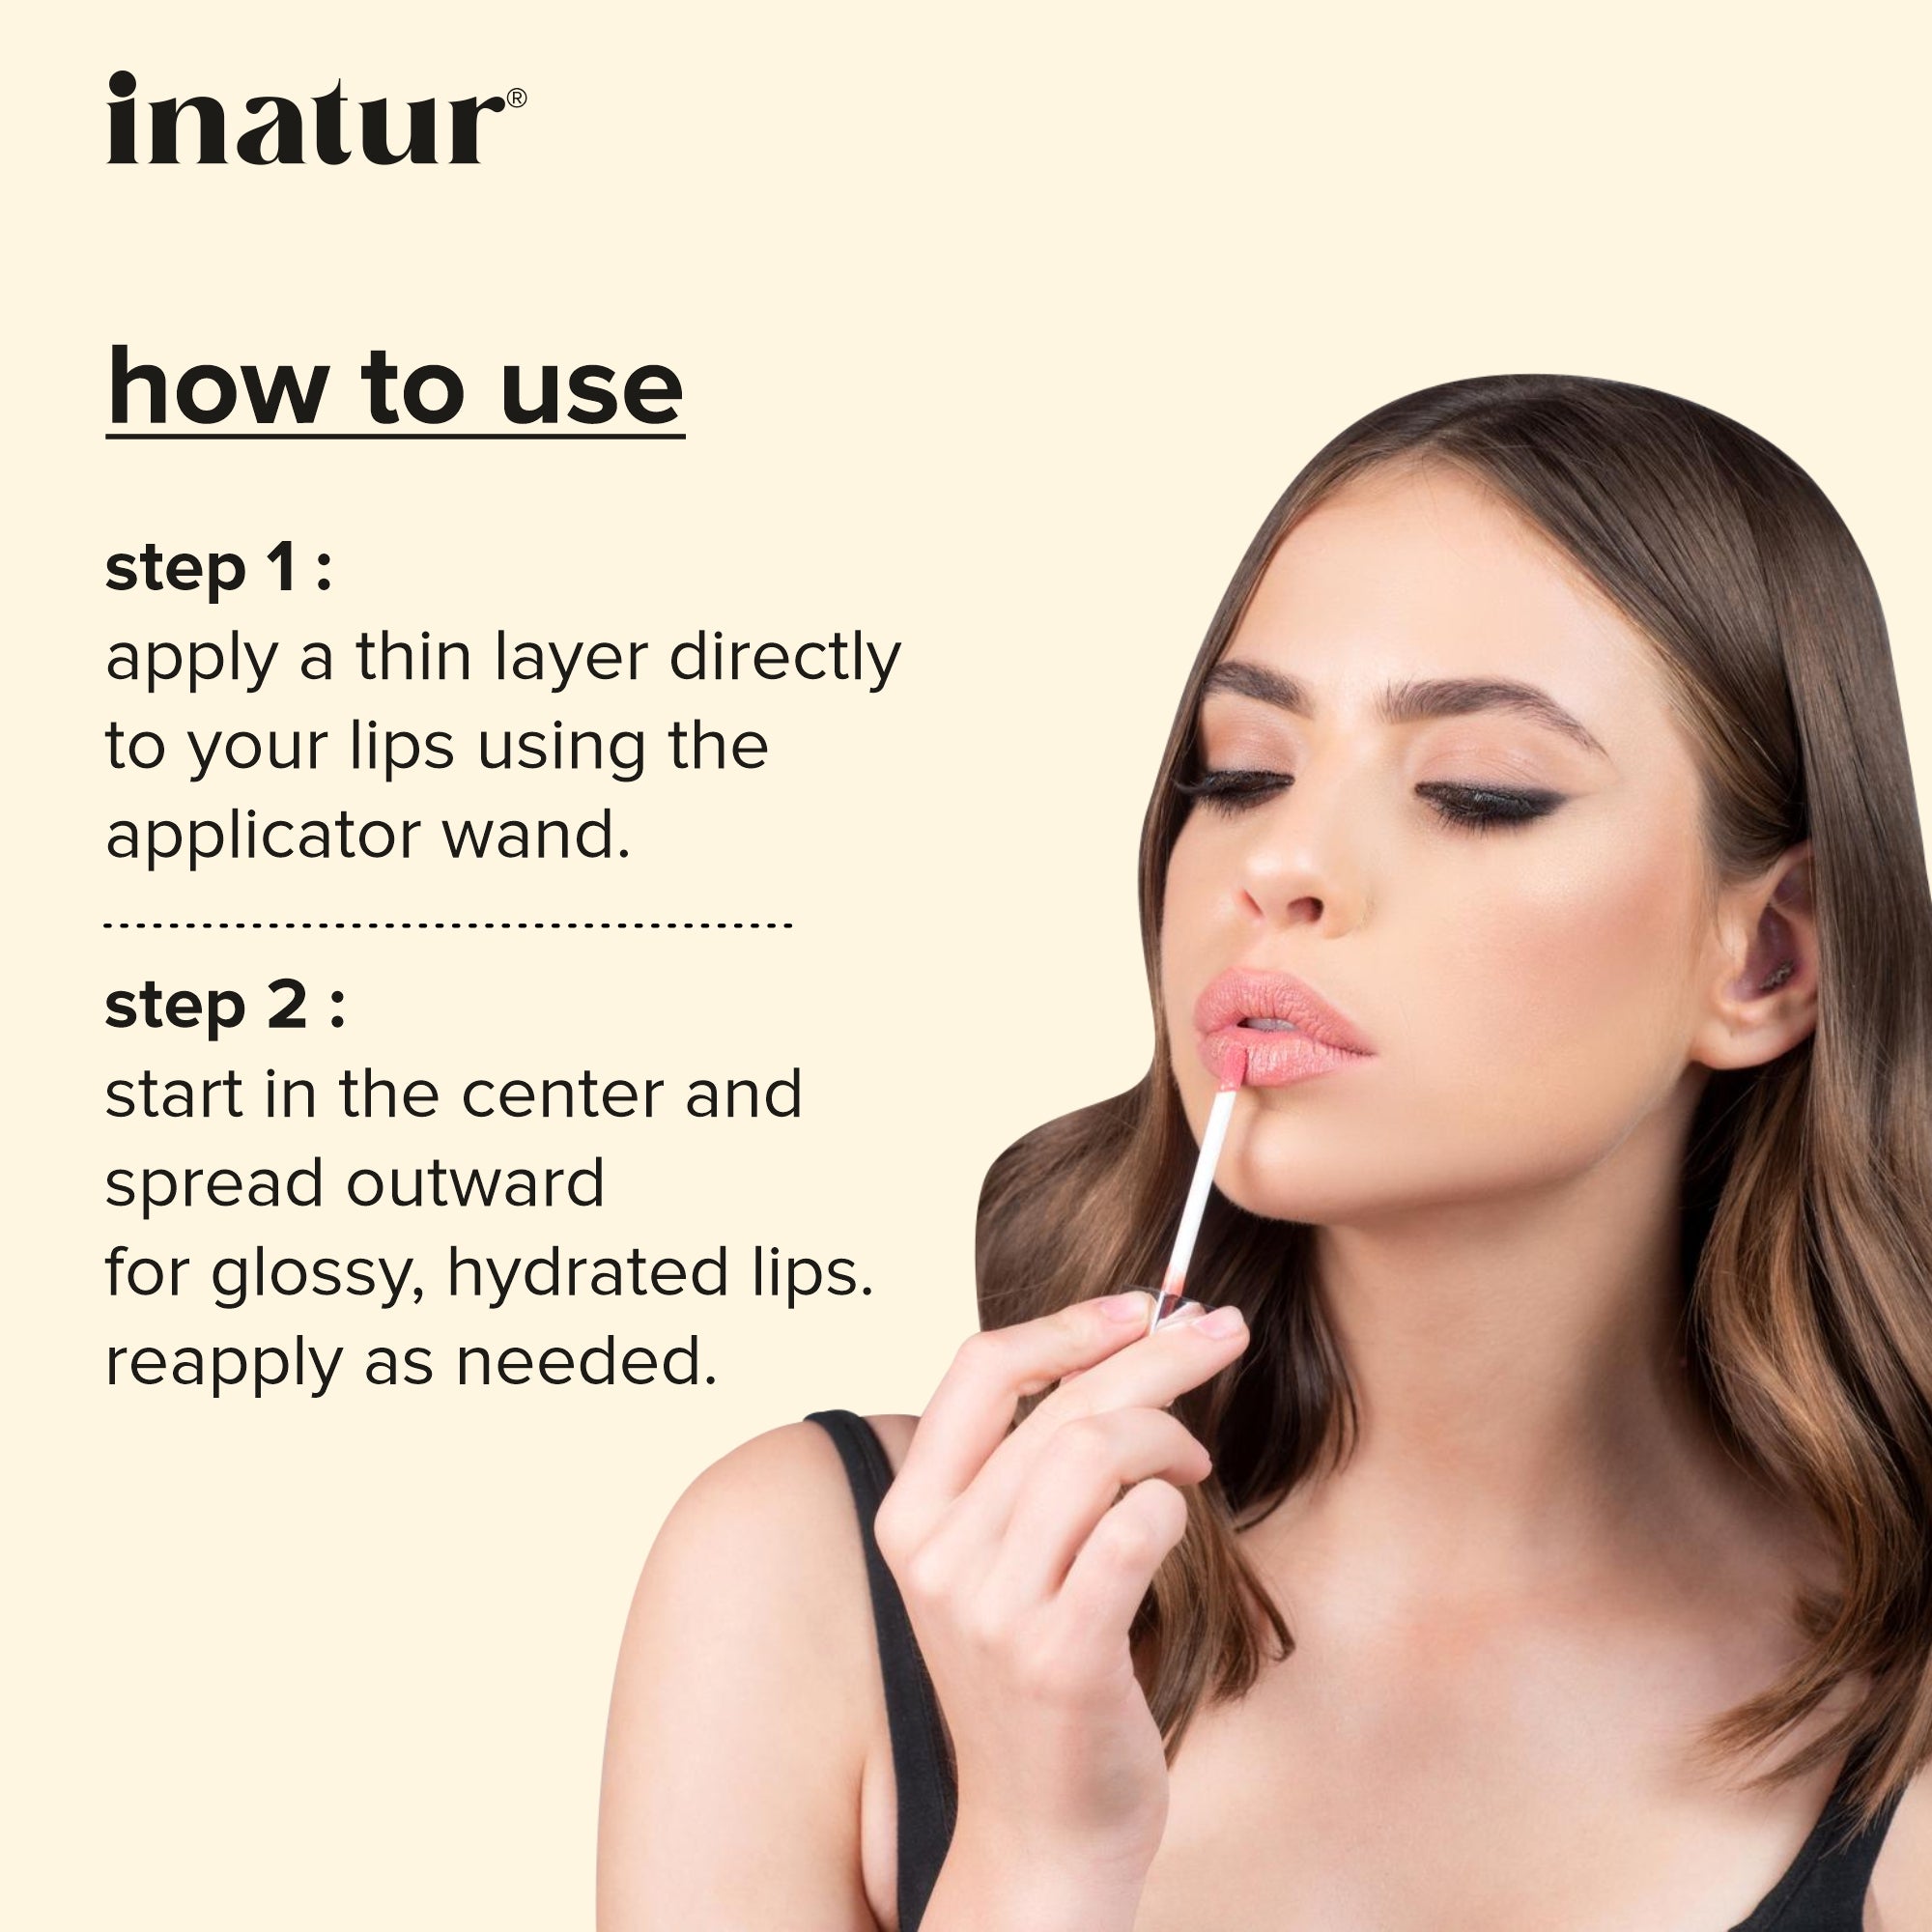 how to use inatur lip gloss